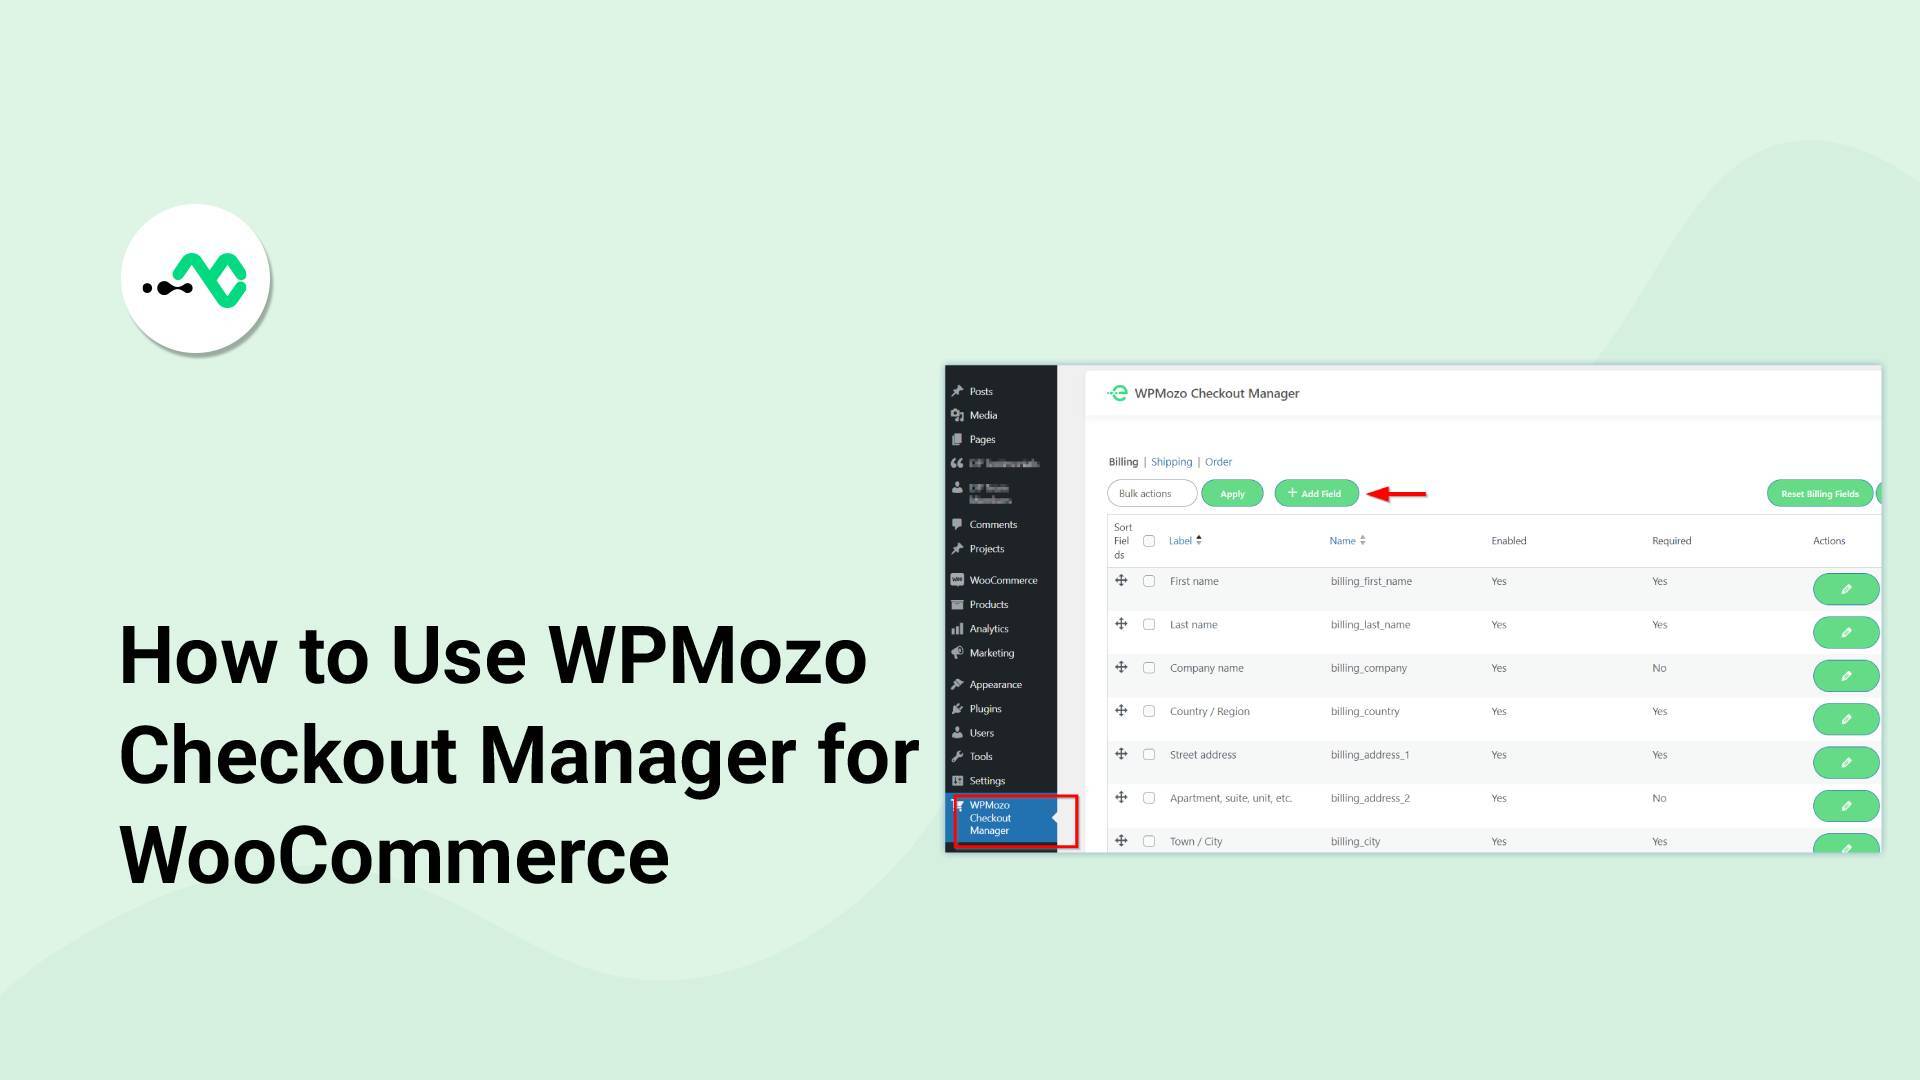 How to Use WPMozo Checkout Manager for WooCommerce